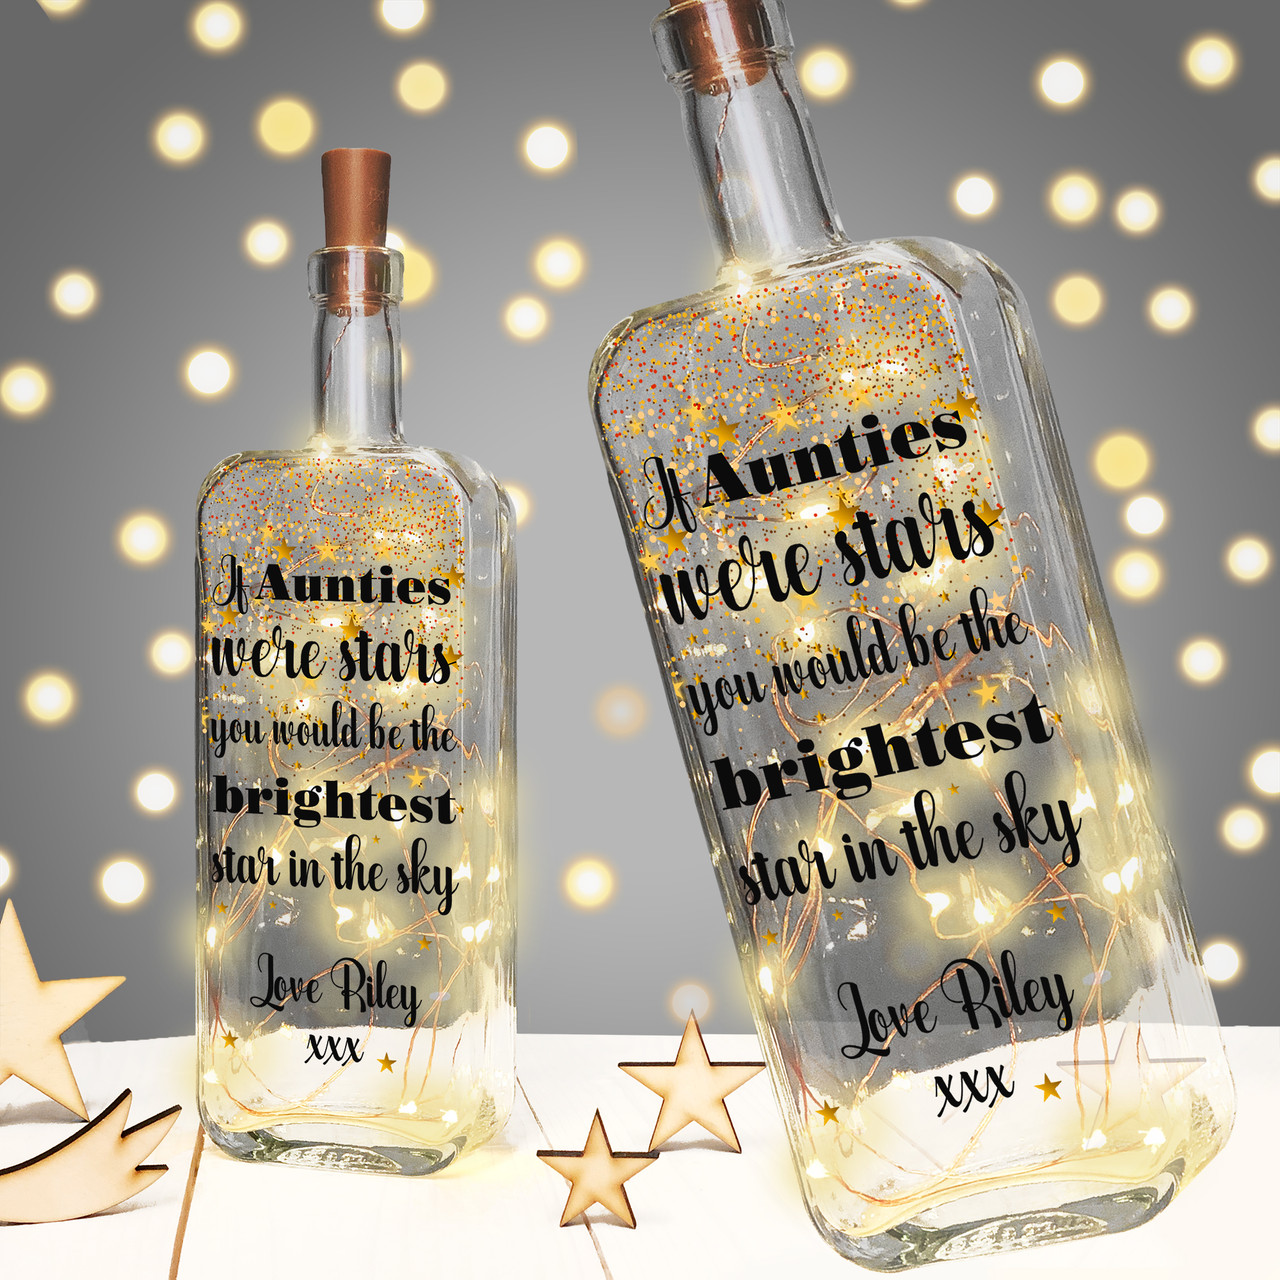 Personalised Light Up Bottle Birthday Gift For Auntie Aunty Or Aunt If Aunties Were Stars You Would Be The Brightest Star In The Sky